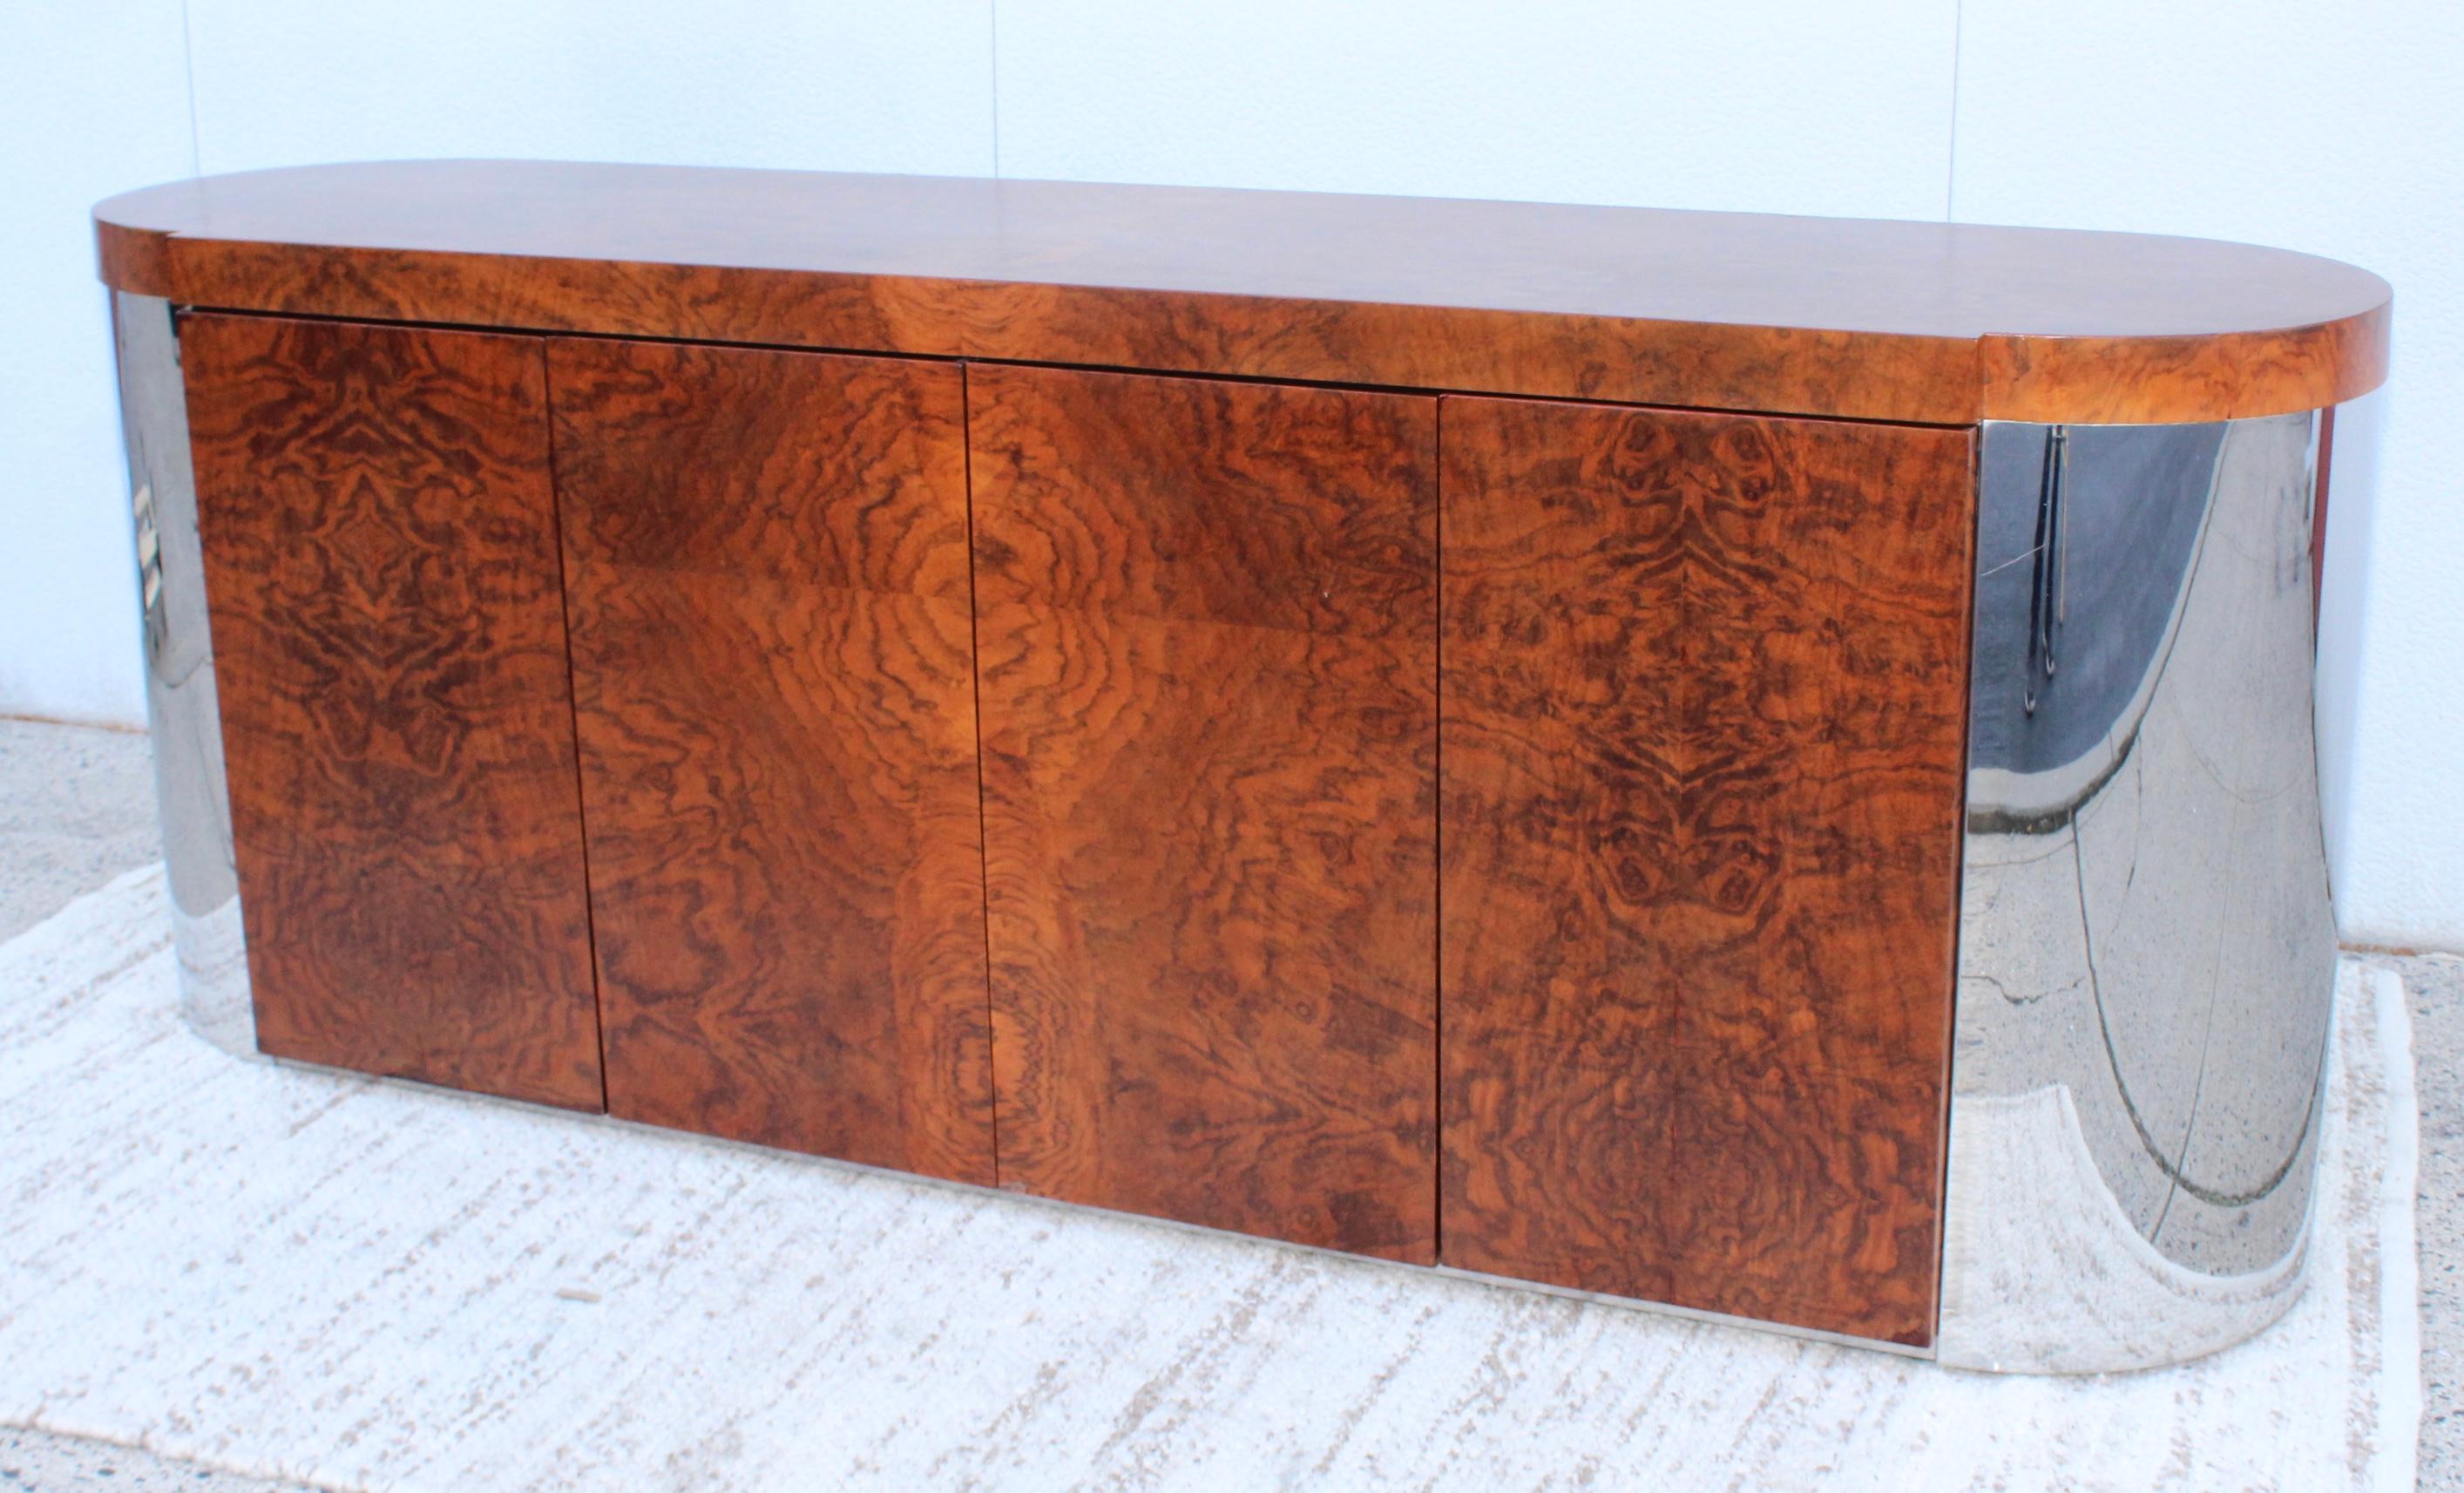 Stunning 1960s well made and very heavy chrome and burl wood Art Deco style credenza with two adjustable shelves. In vintage original condition, with some wear and patina a few repairs to the burl wood.